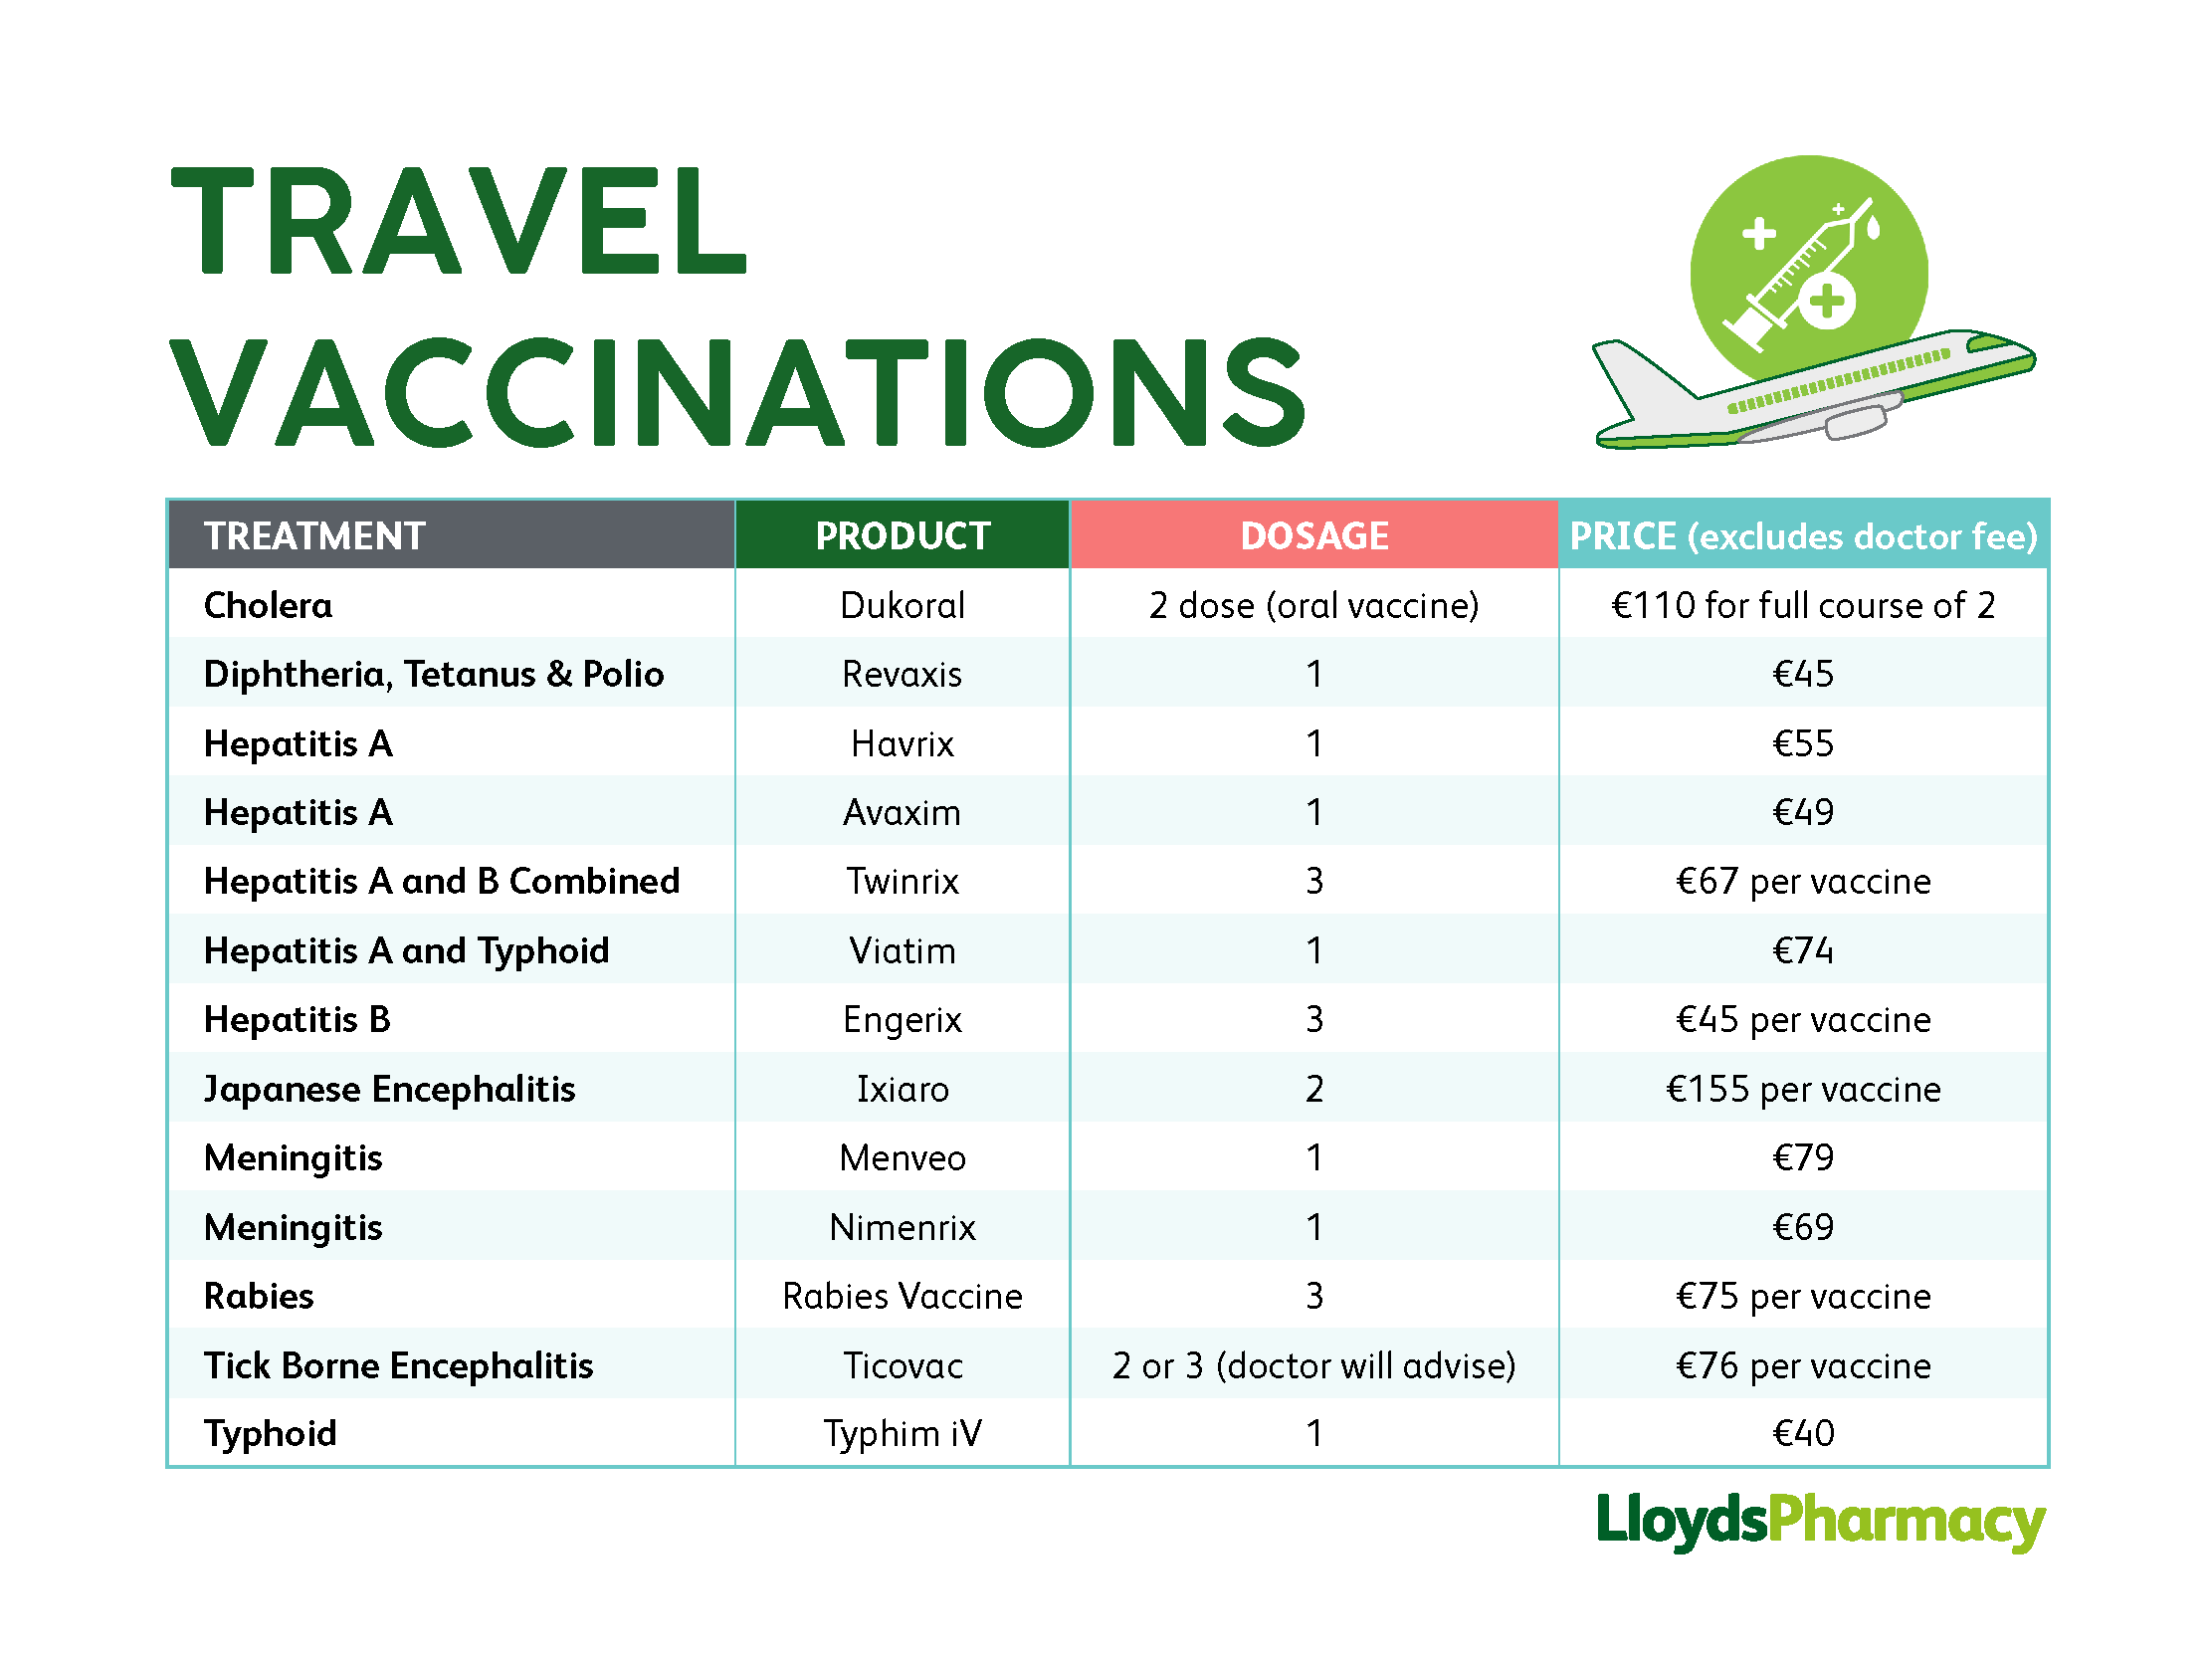 vaccinations for travel abroad